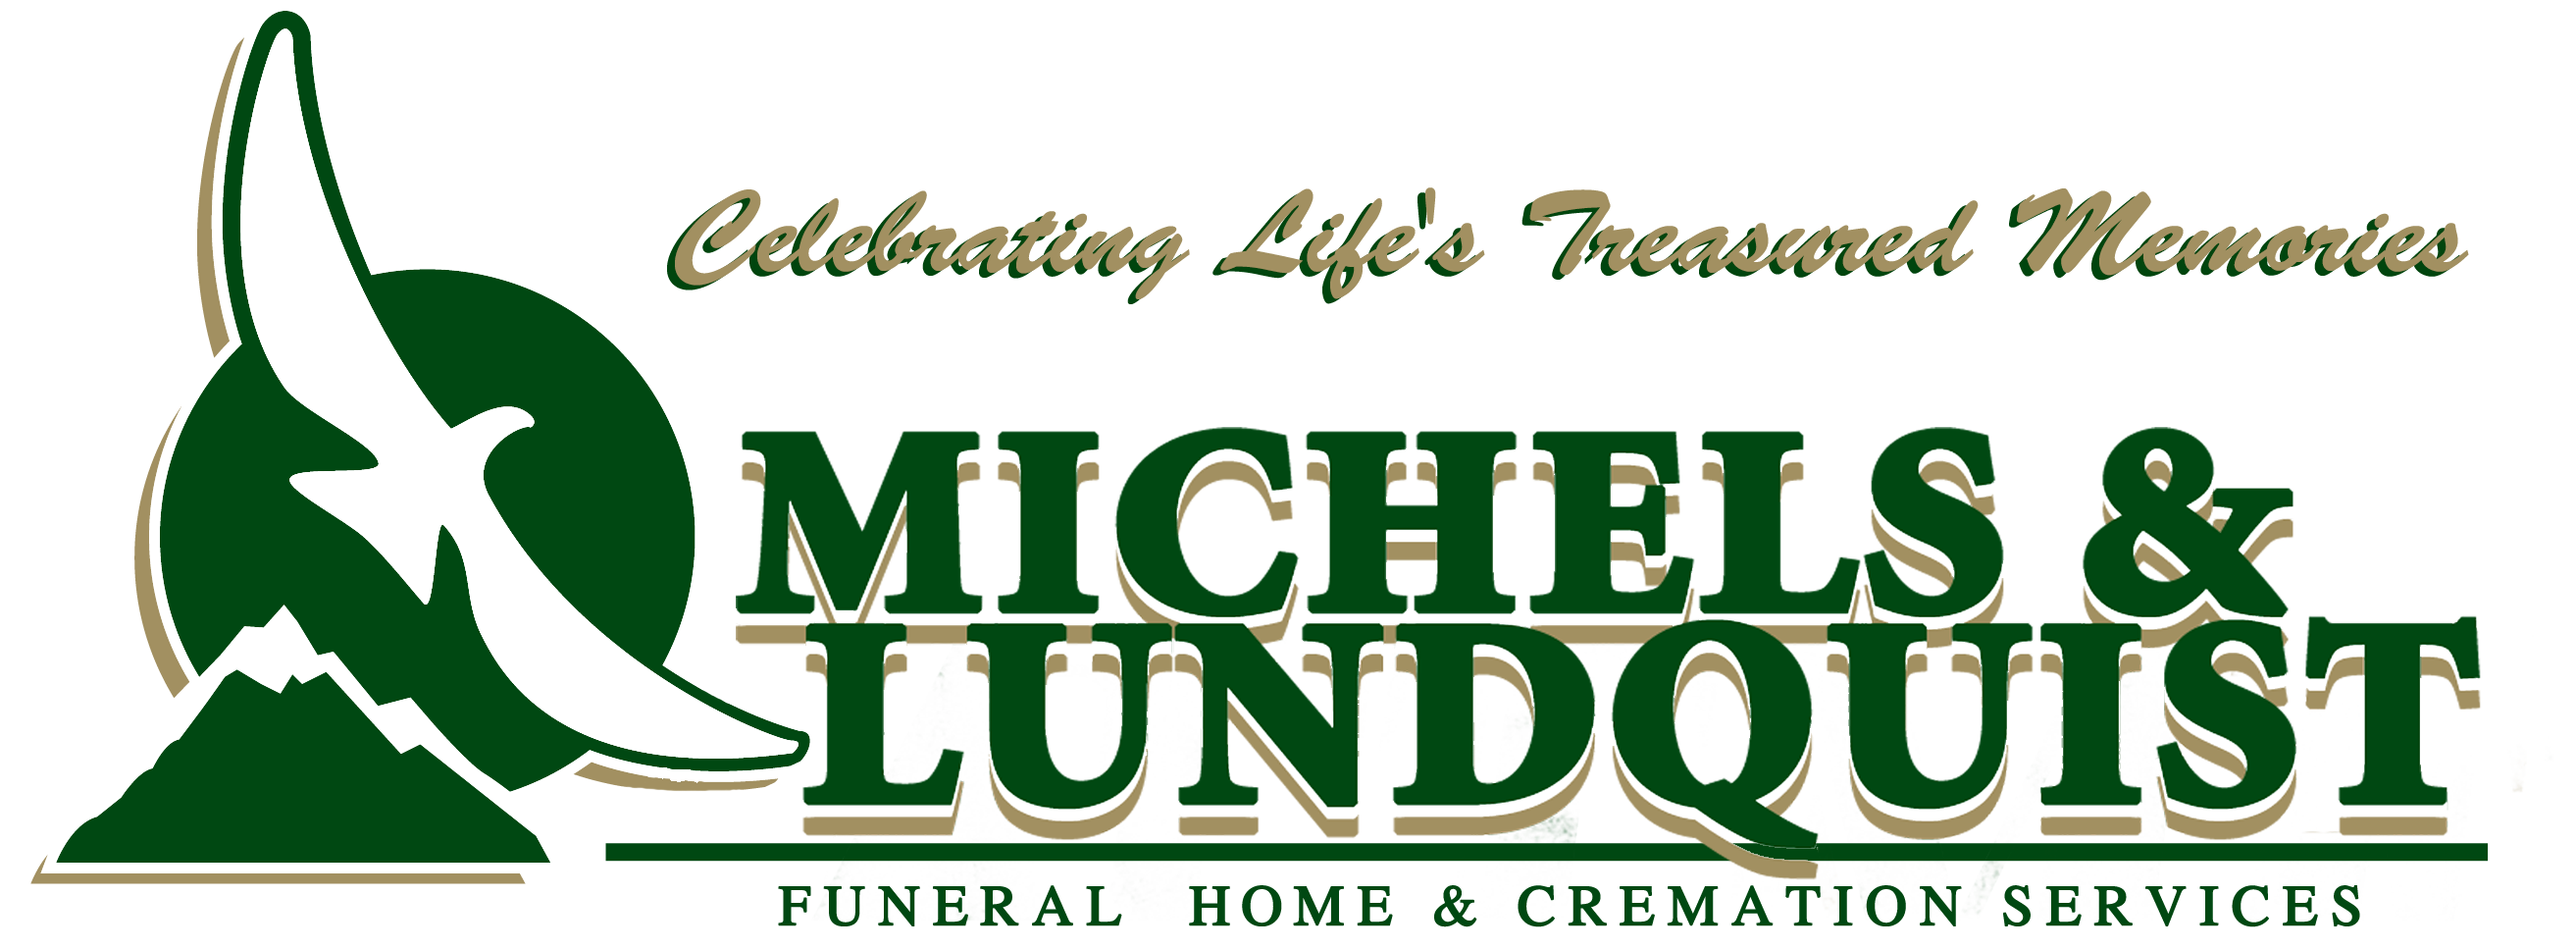 Michels and Lundquist Logo with Slogan "Celebrating Life's Treasured Memories"